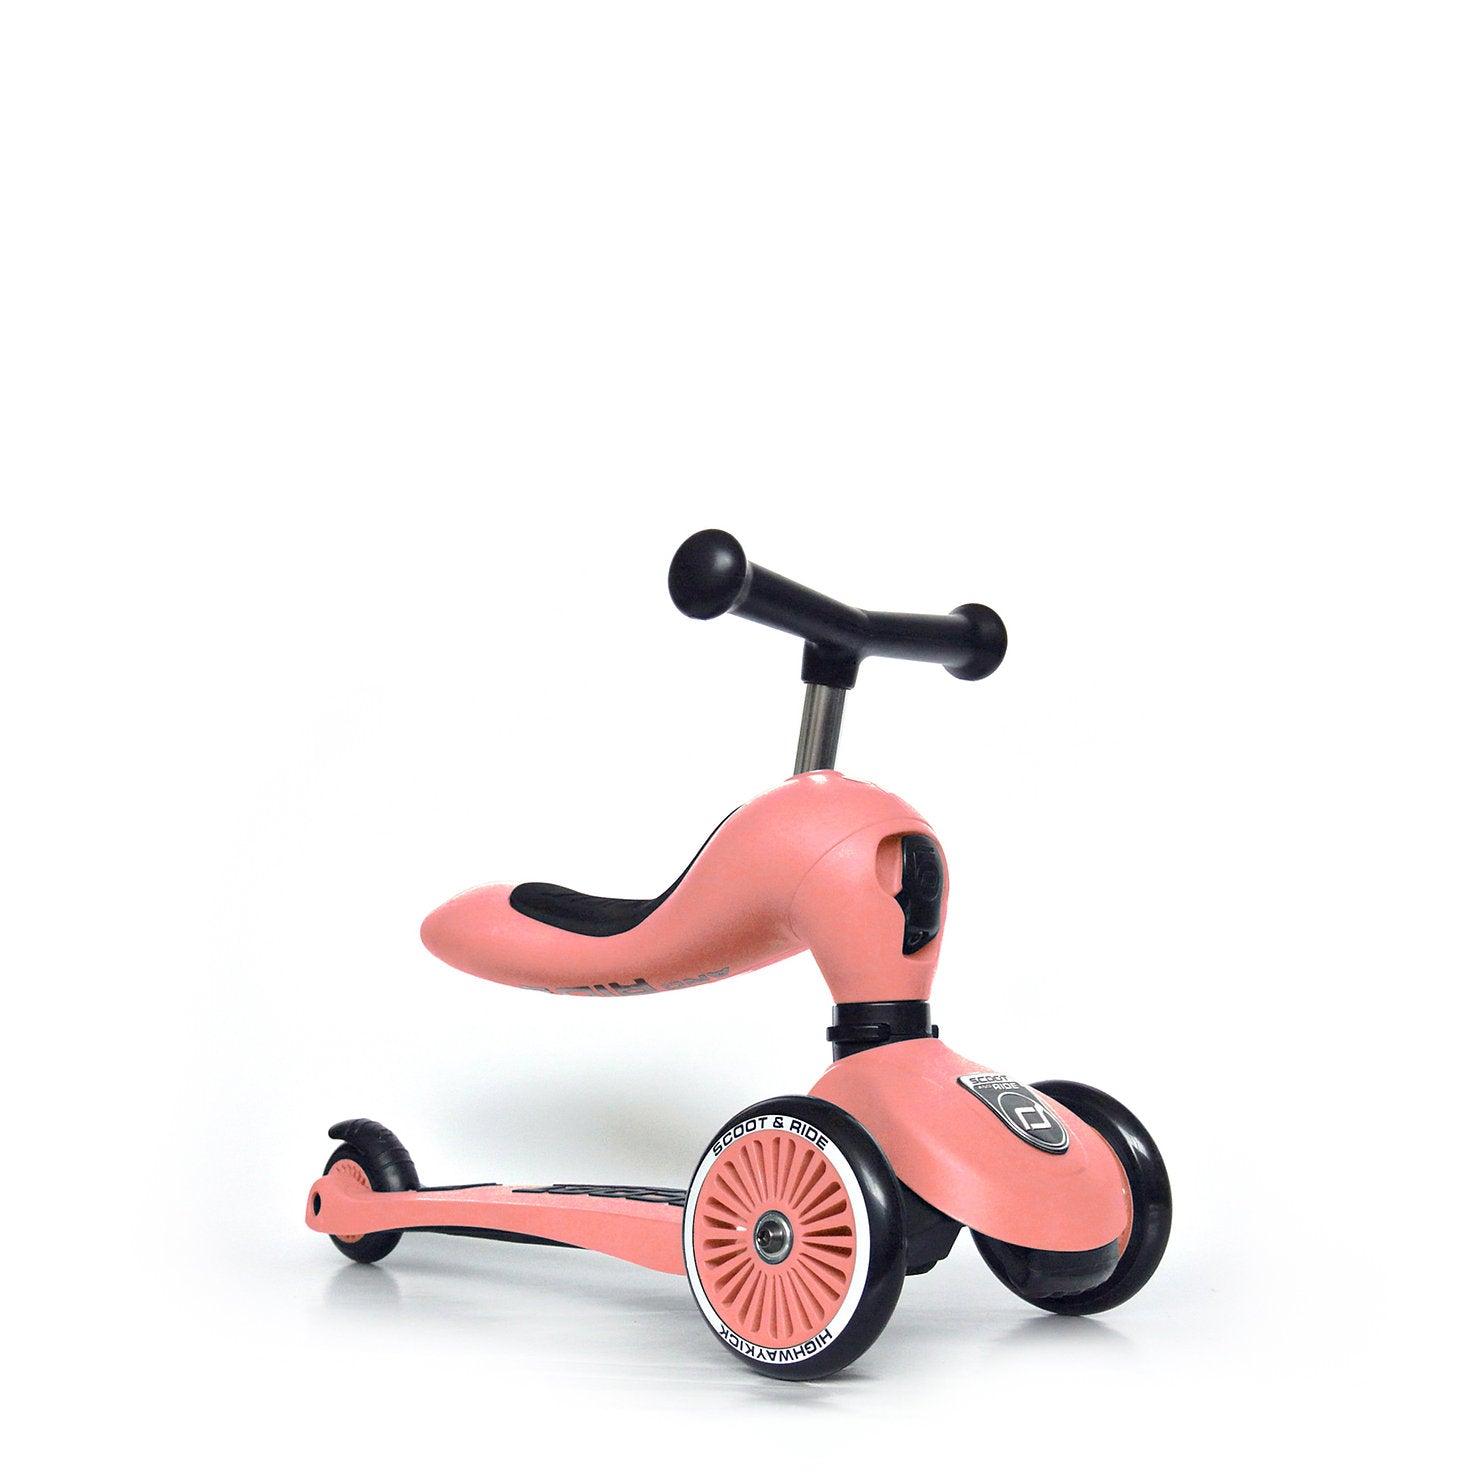 Scoot and Ride Roller Highway Kick 1 peach